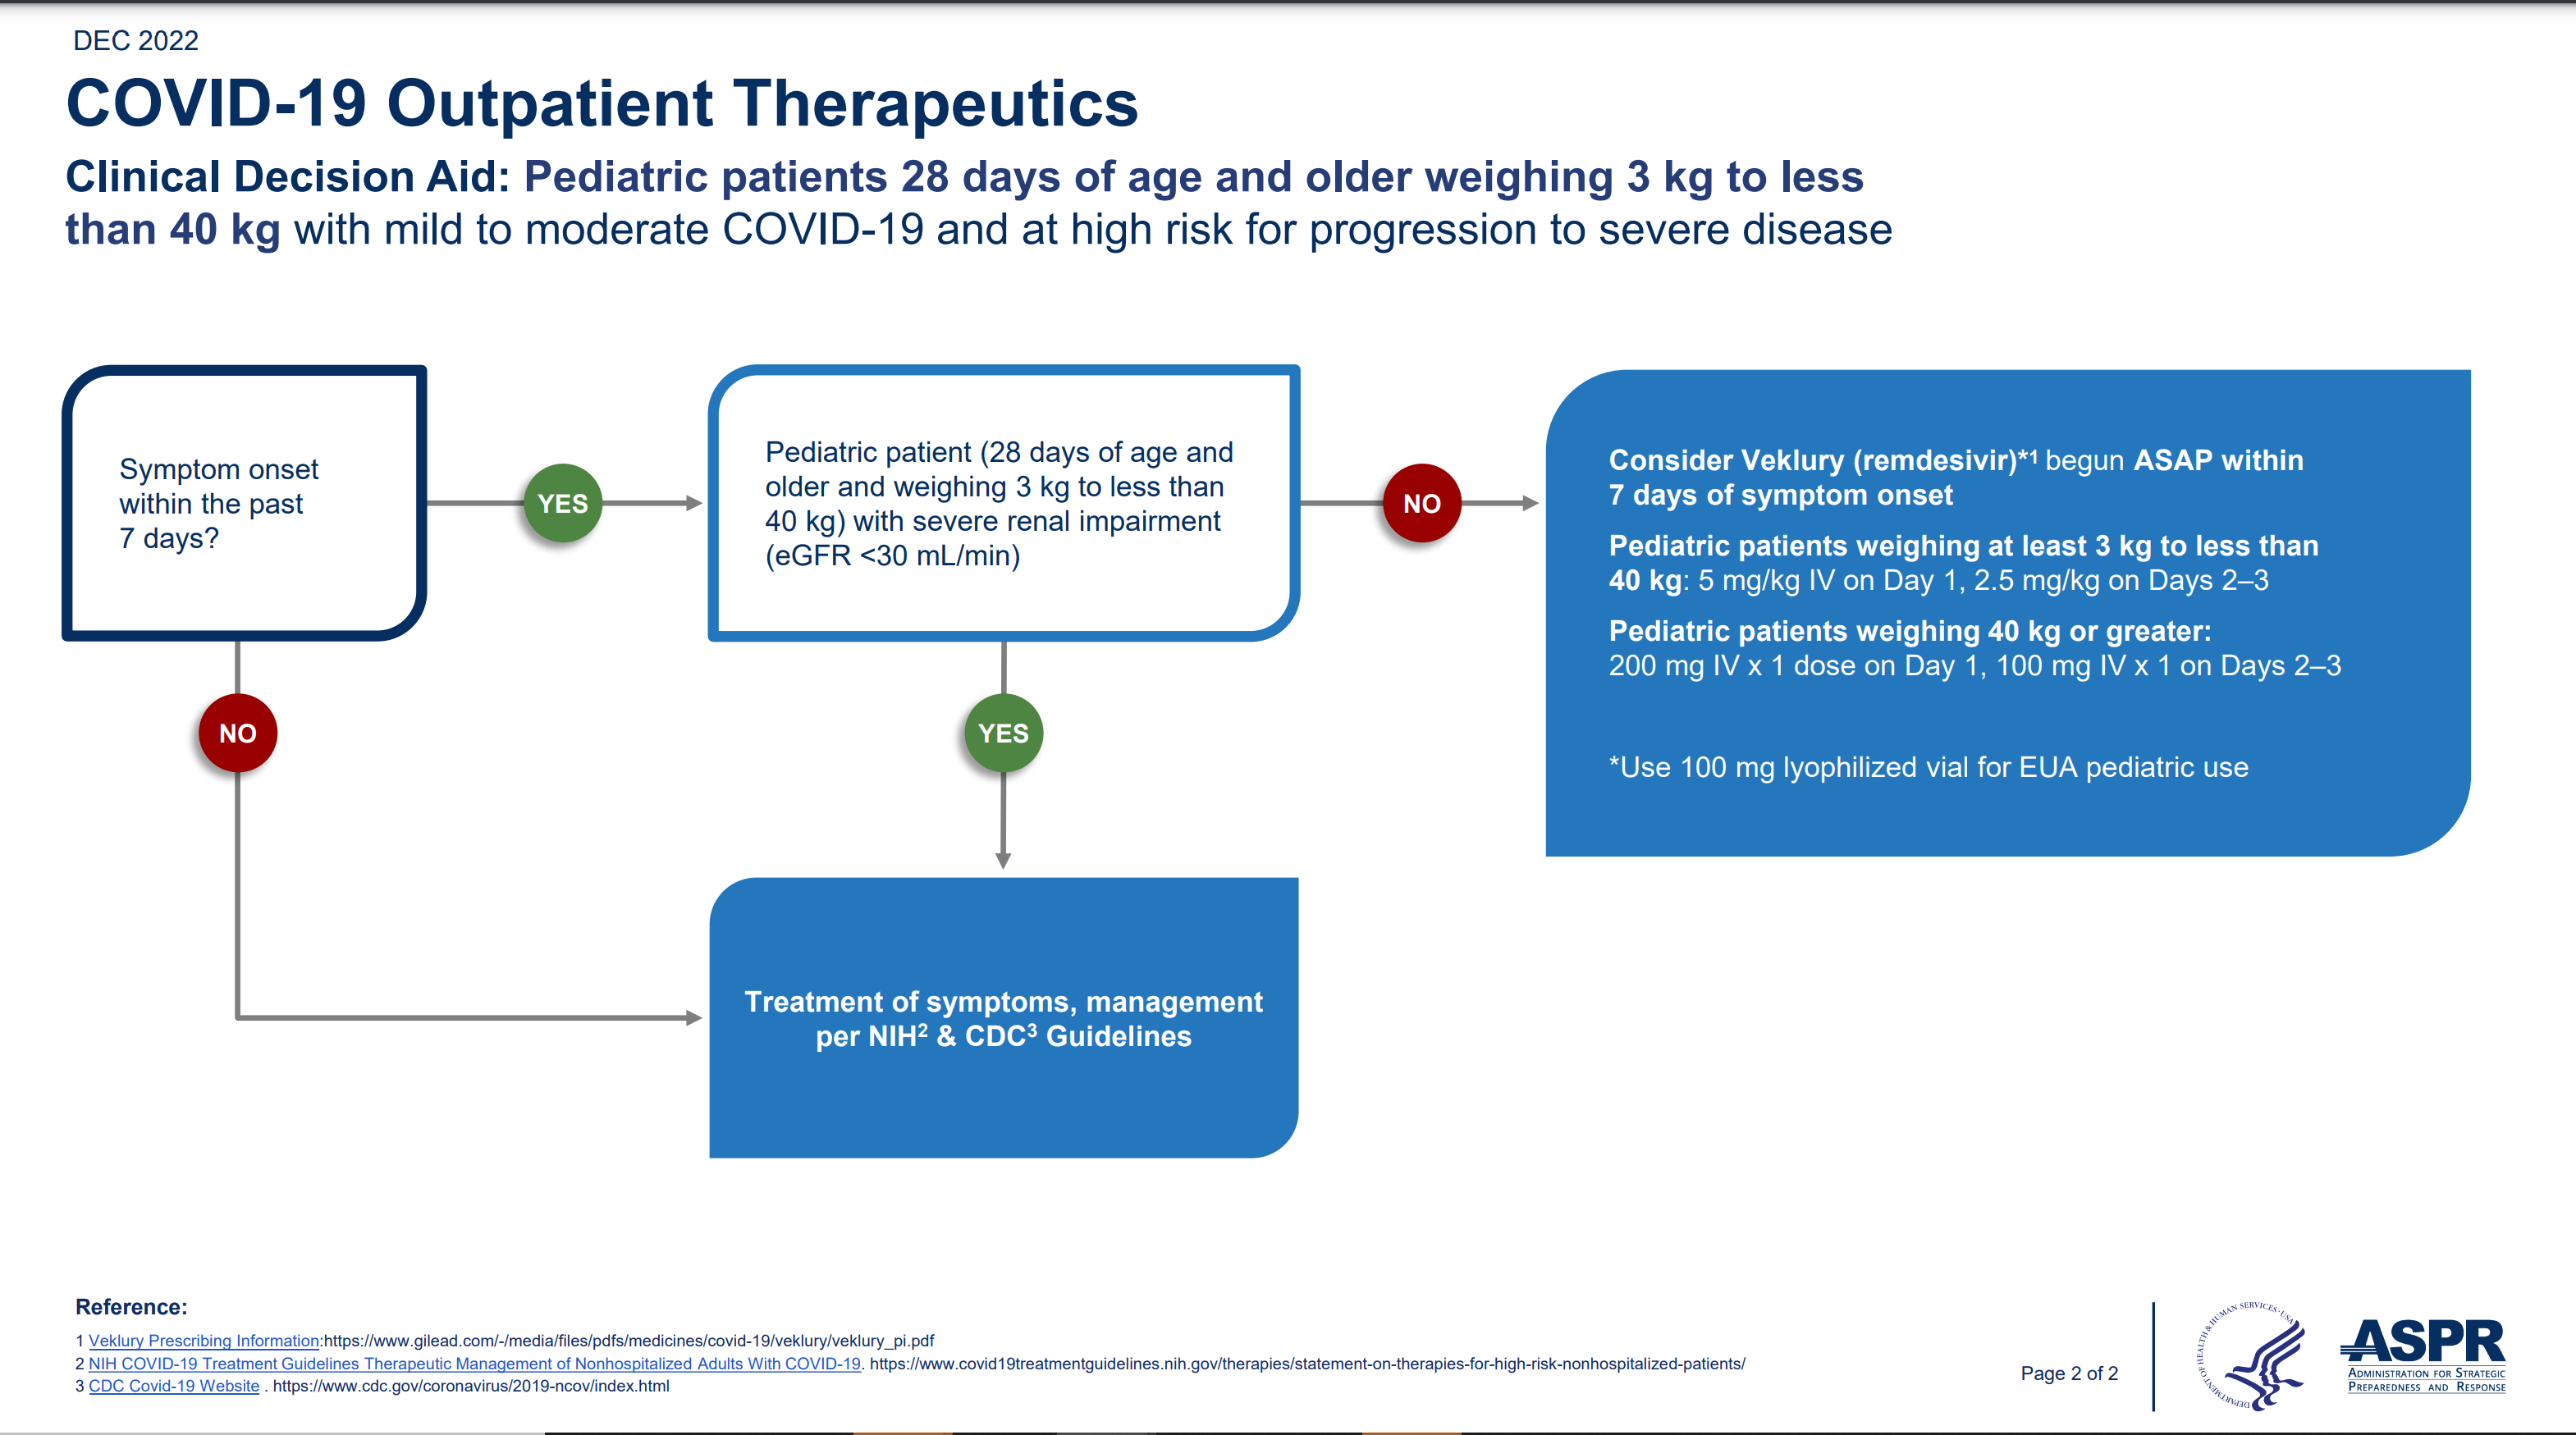 COVID 19 Out Patient Therapeutics page 2. Clinical decision Aid:  Pediatric patients 28 days of age and older weighing 3kg to less than 40g